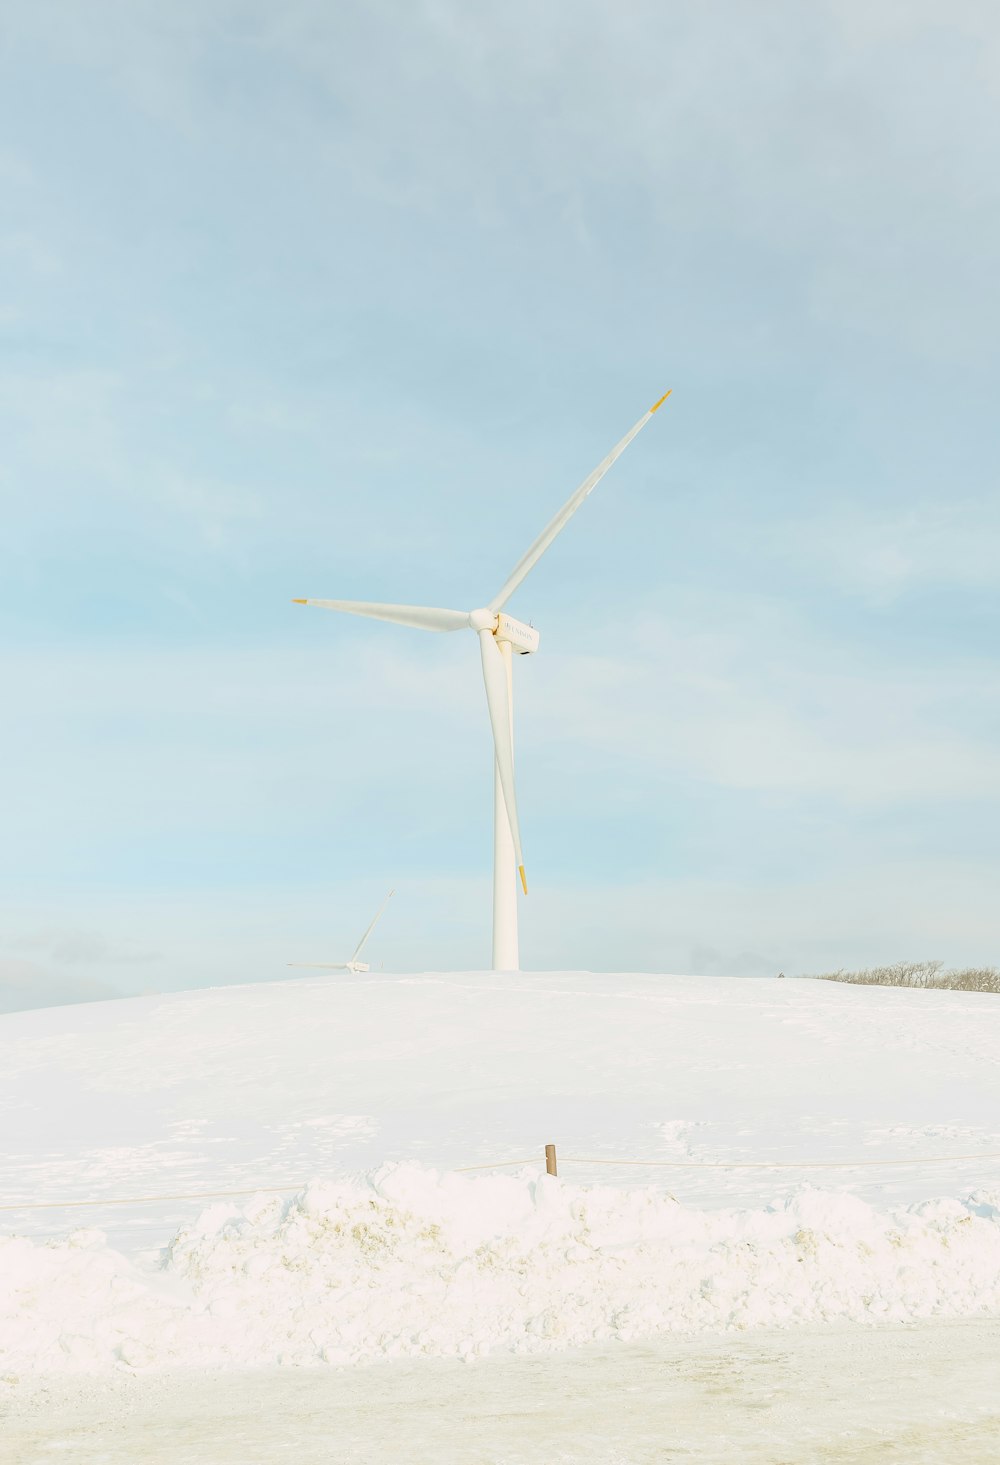 a wind turbine in the middle of a snowy field